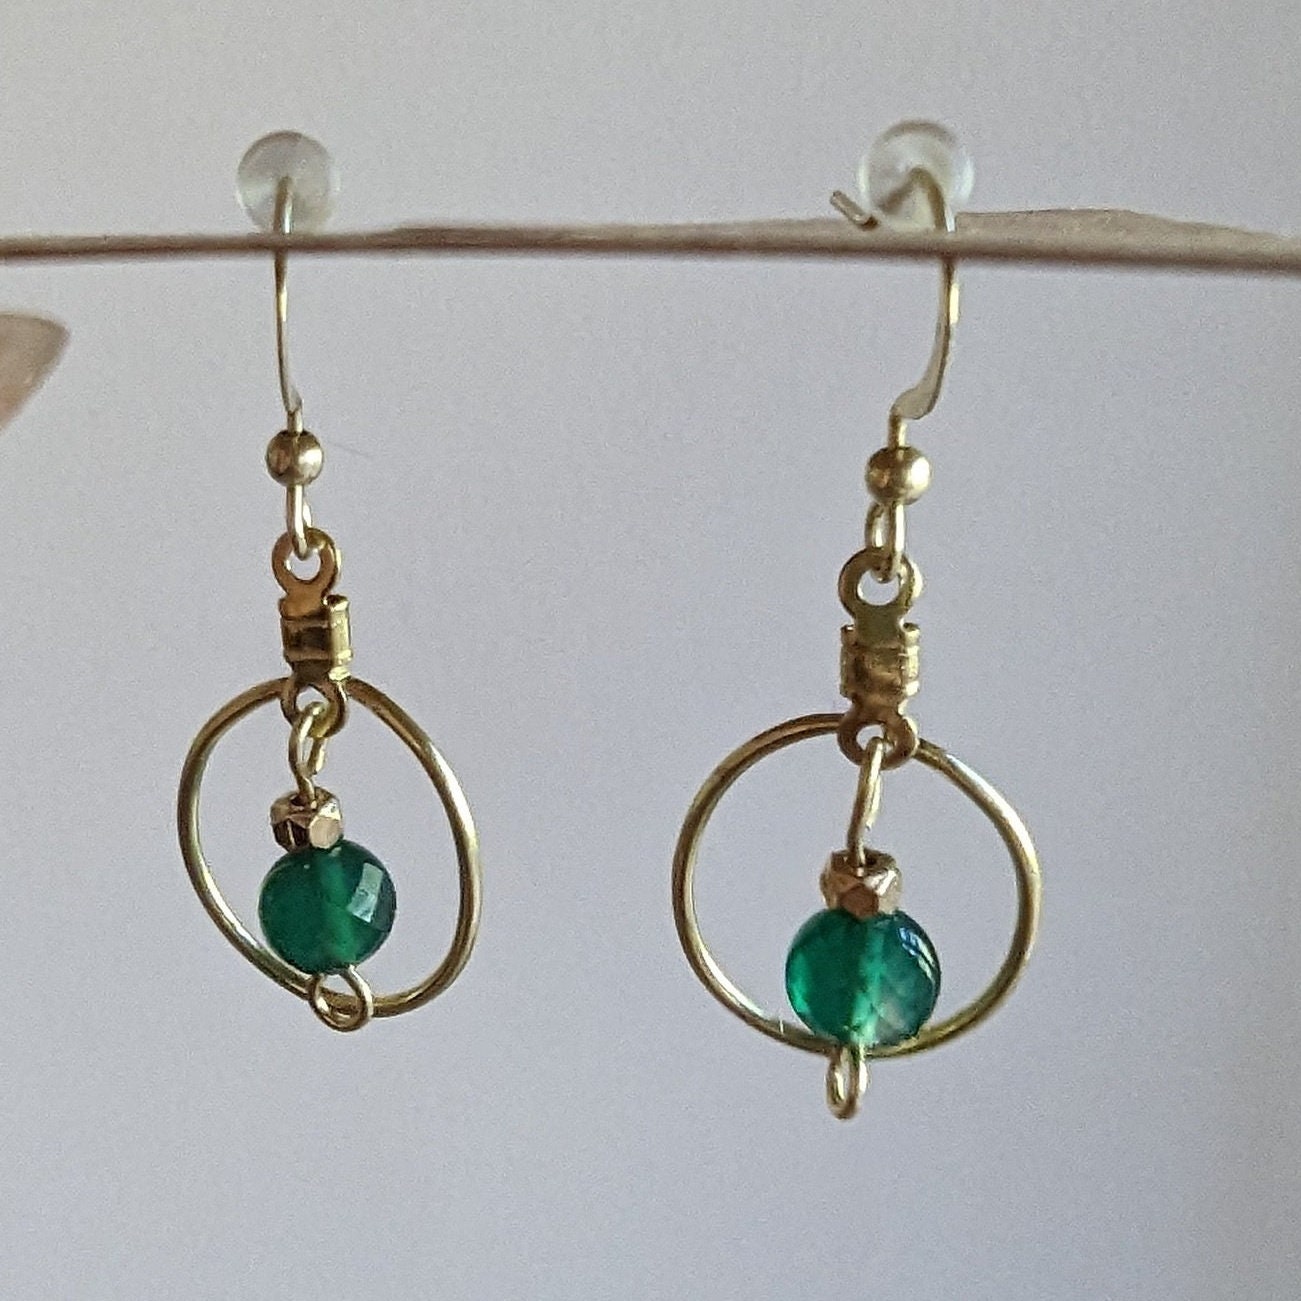 Jade Bead Golden Hoop Minimalistic Earrings Asian Palace Inspired Earrings Collection